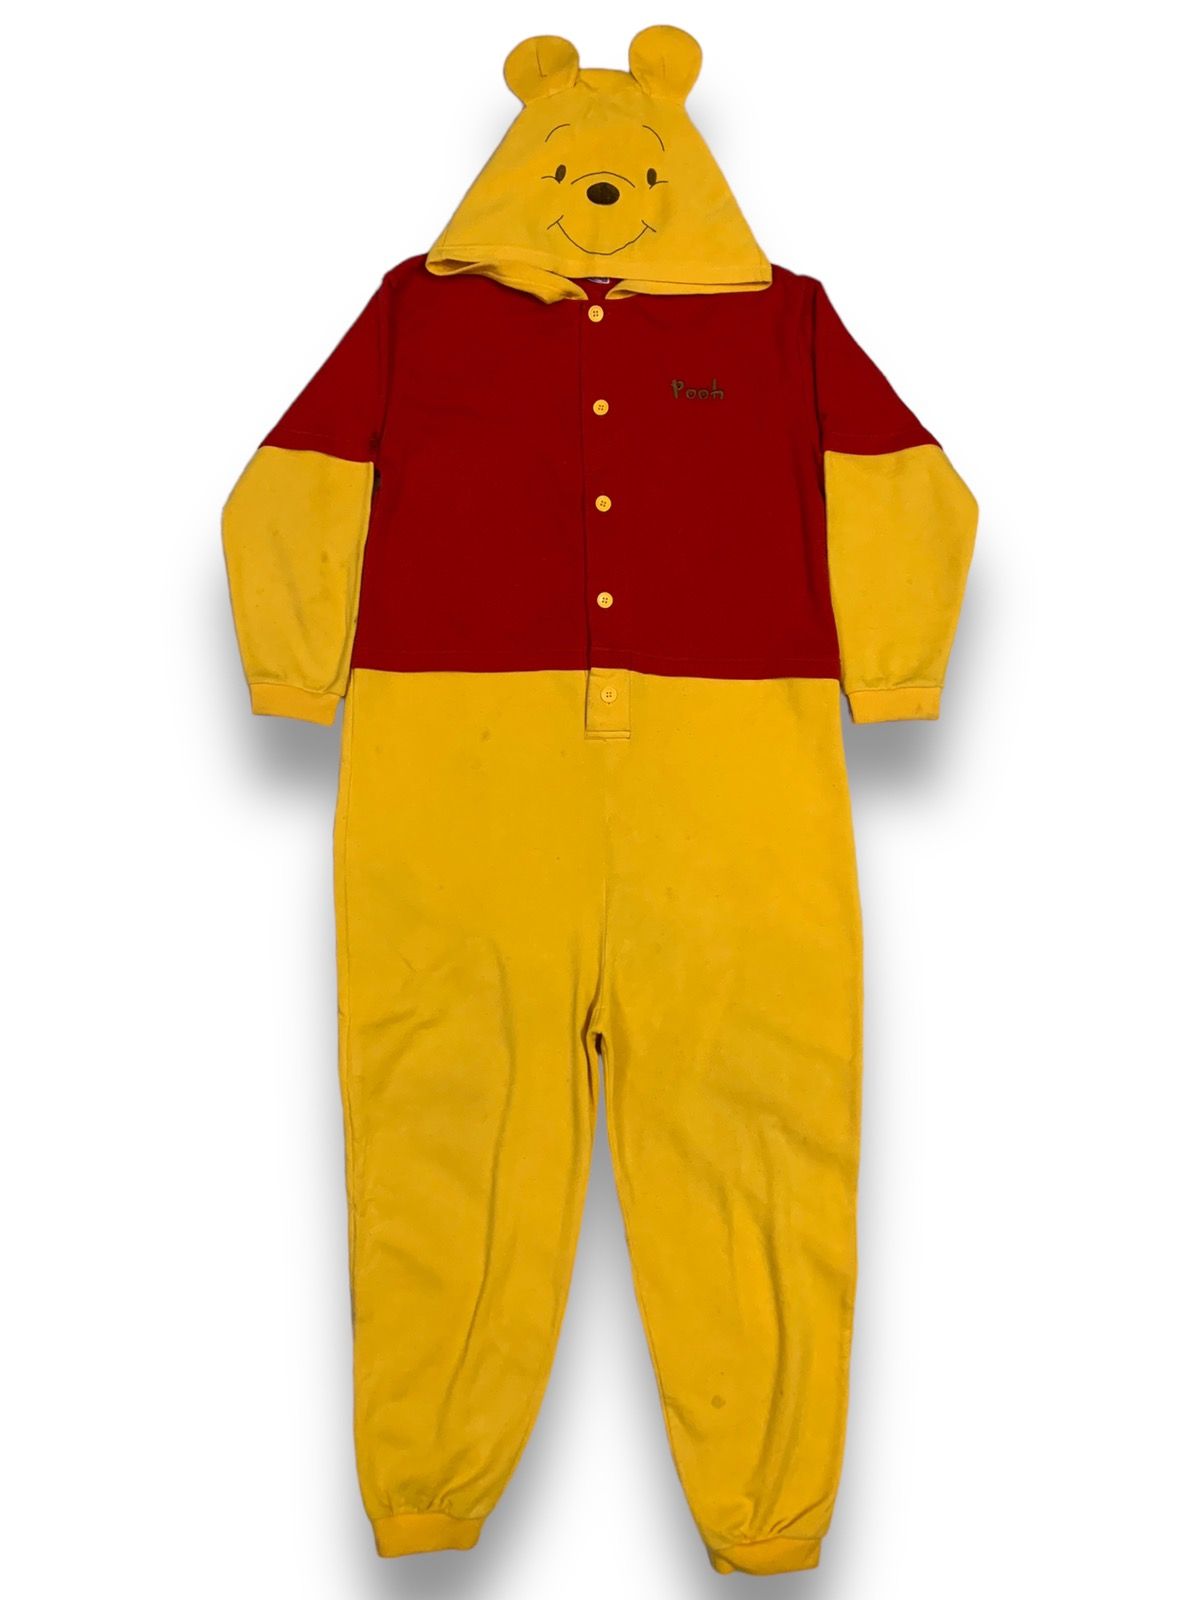 Pre-owned Cartoon Network X Disney Vintage Disney Winnie The Pooh Pajama Costume/overalls In Red/yellow